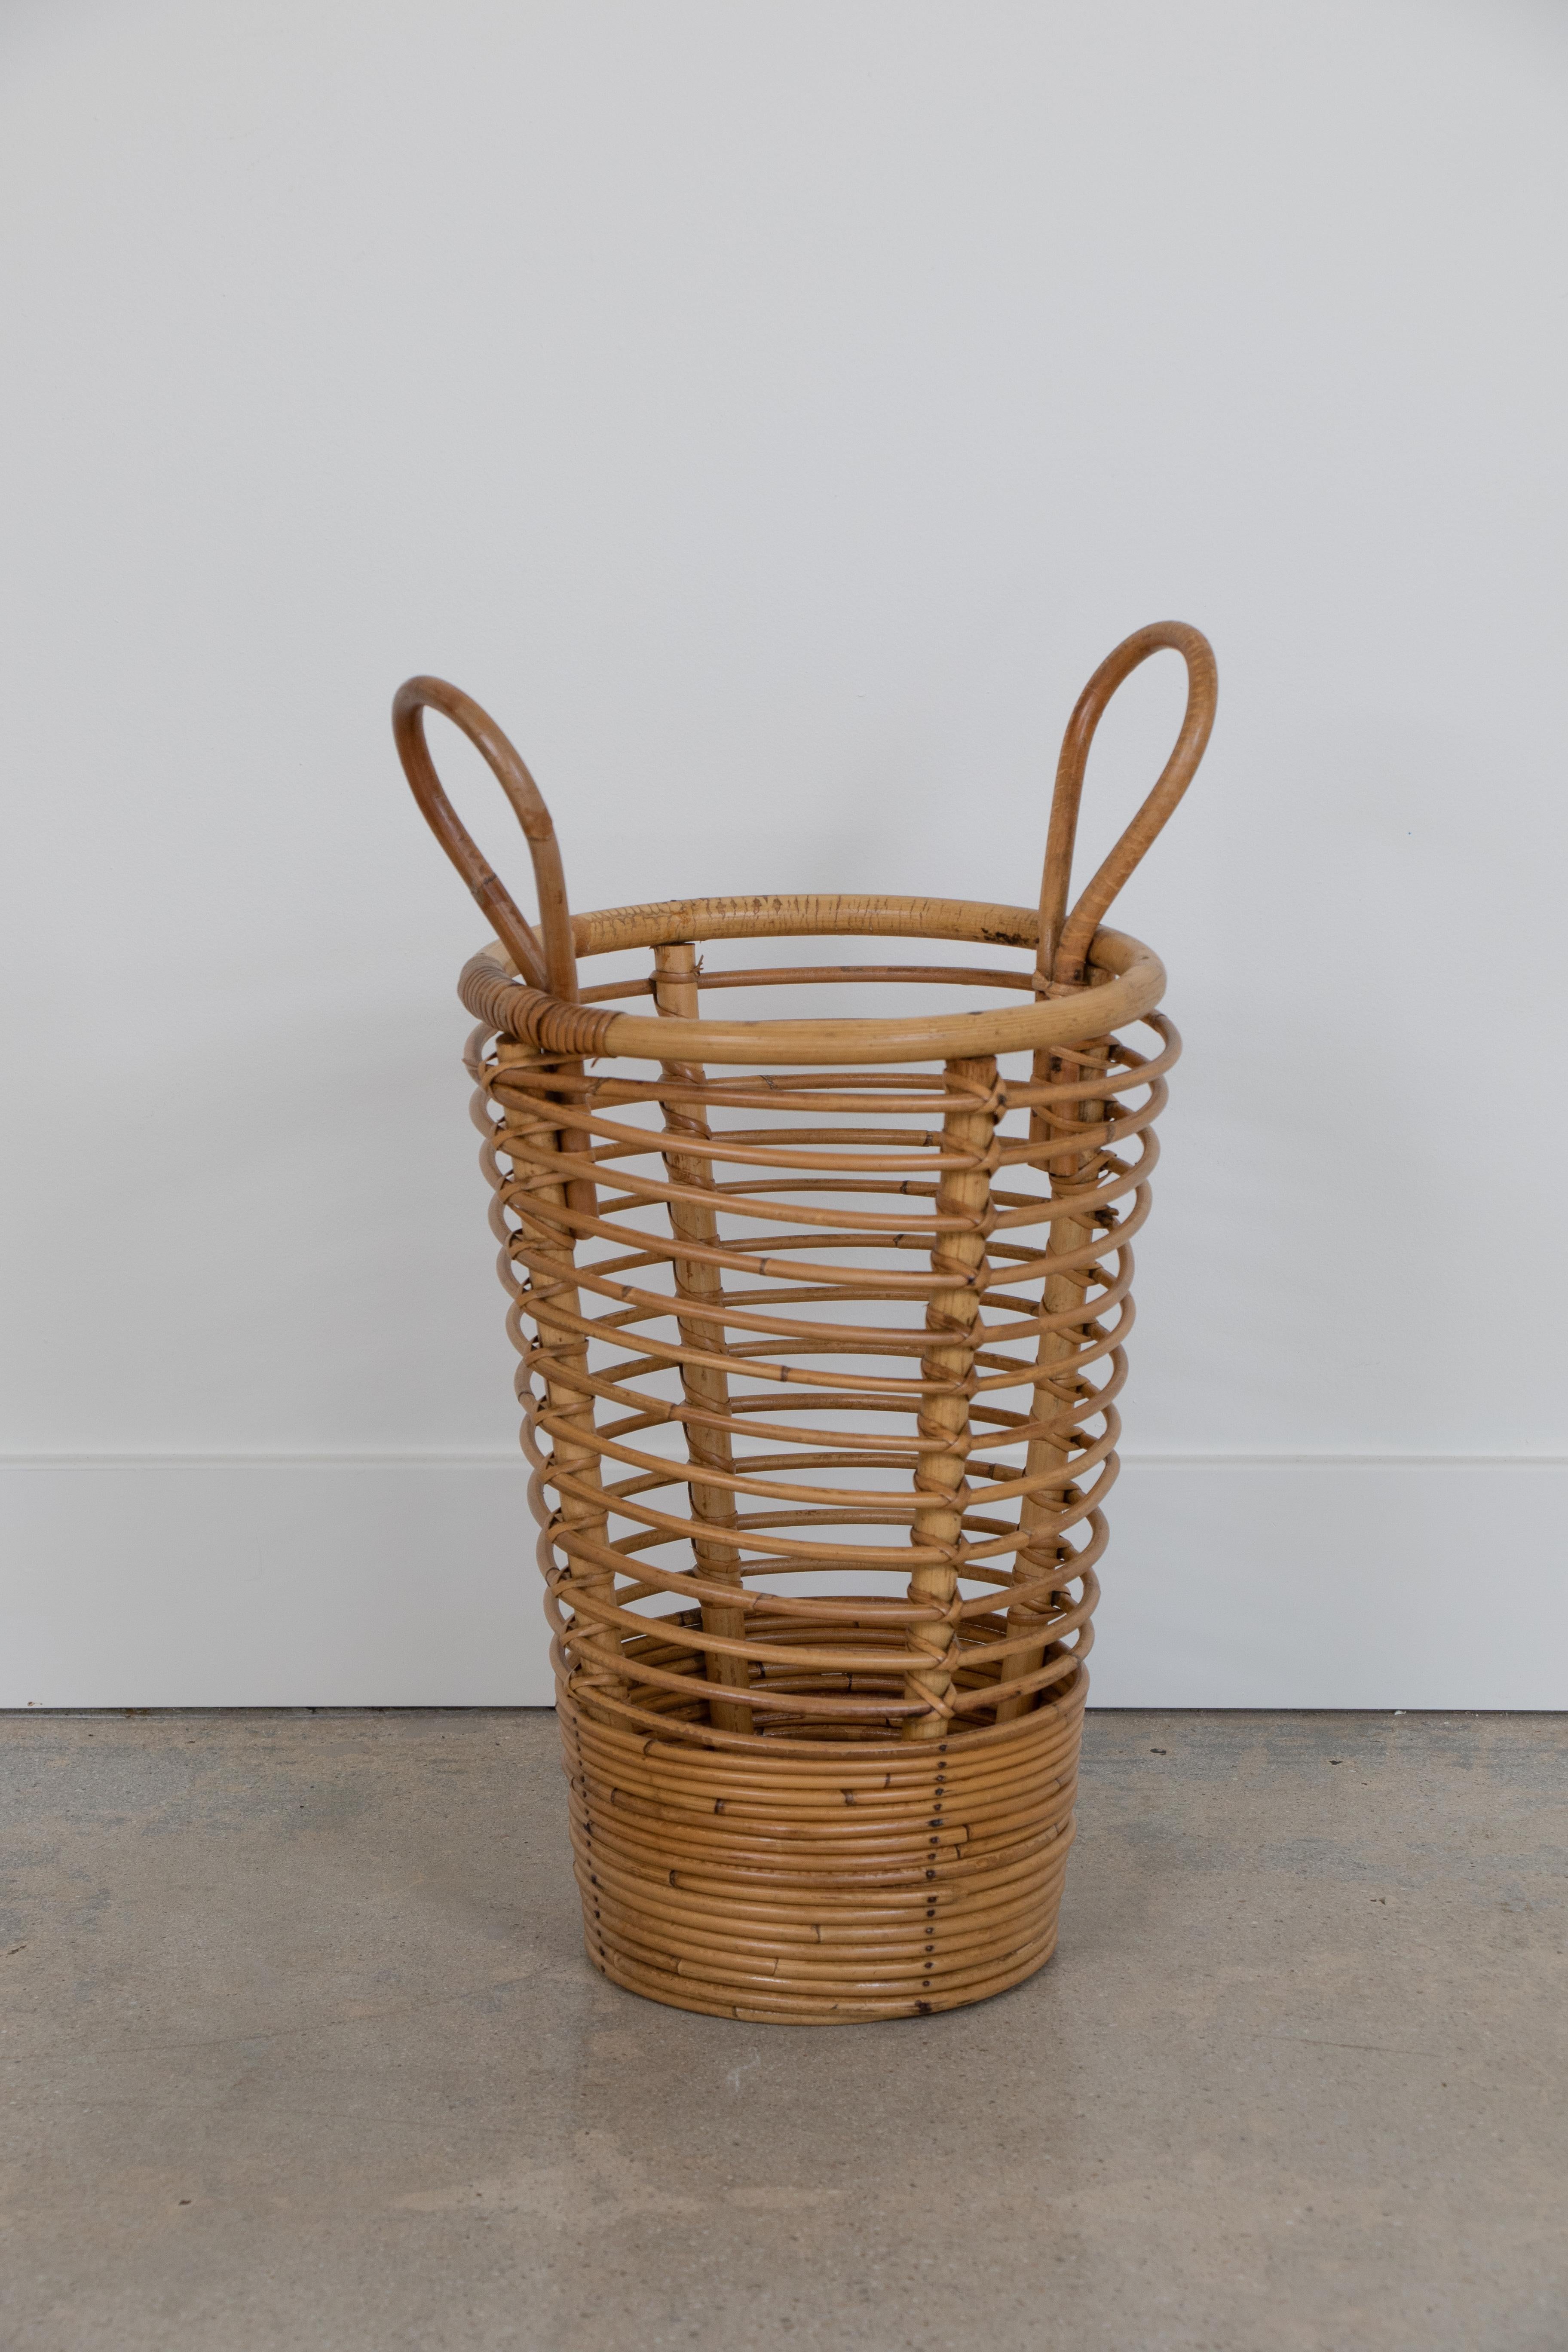 French rattan umbrella holder from the 1960s. Circular rattan base with two handles at top. Great natural coloring and patina.